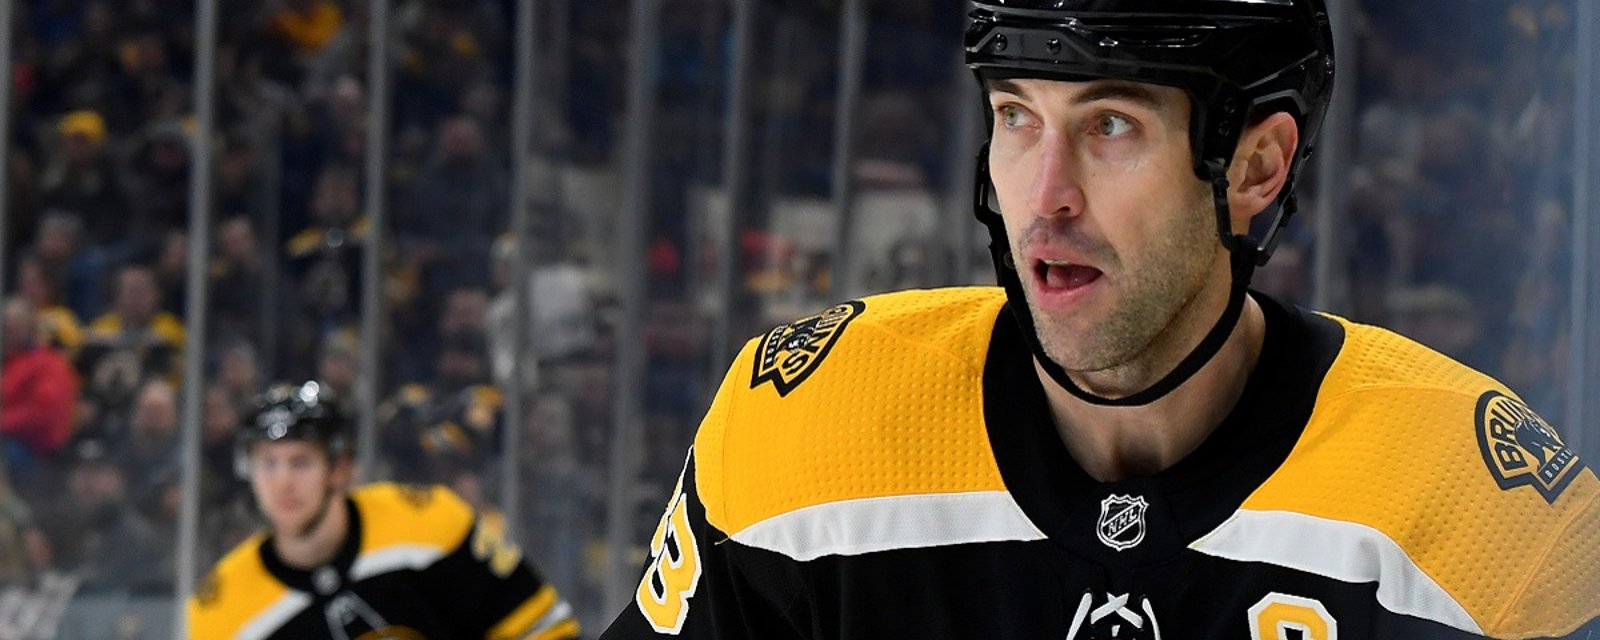 Update on Bruins captain Zdeno Chara from Sunday's practice.